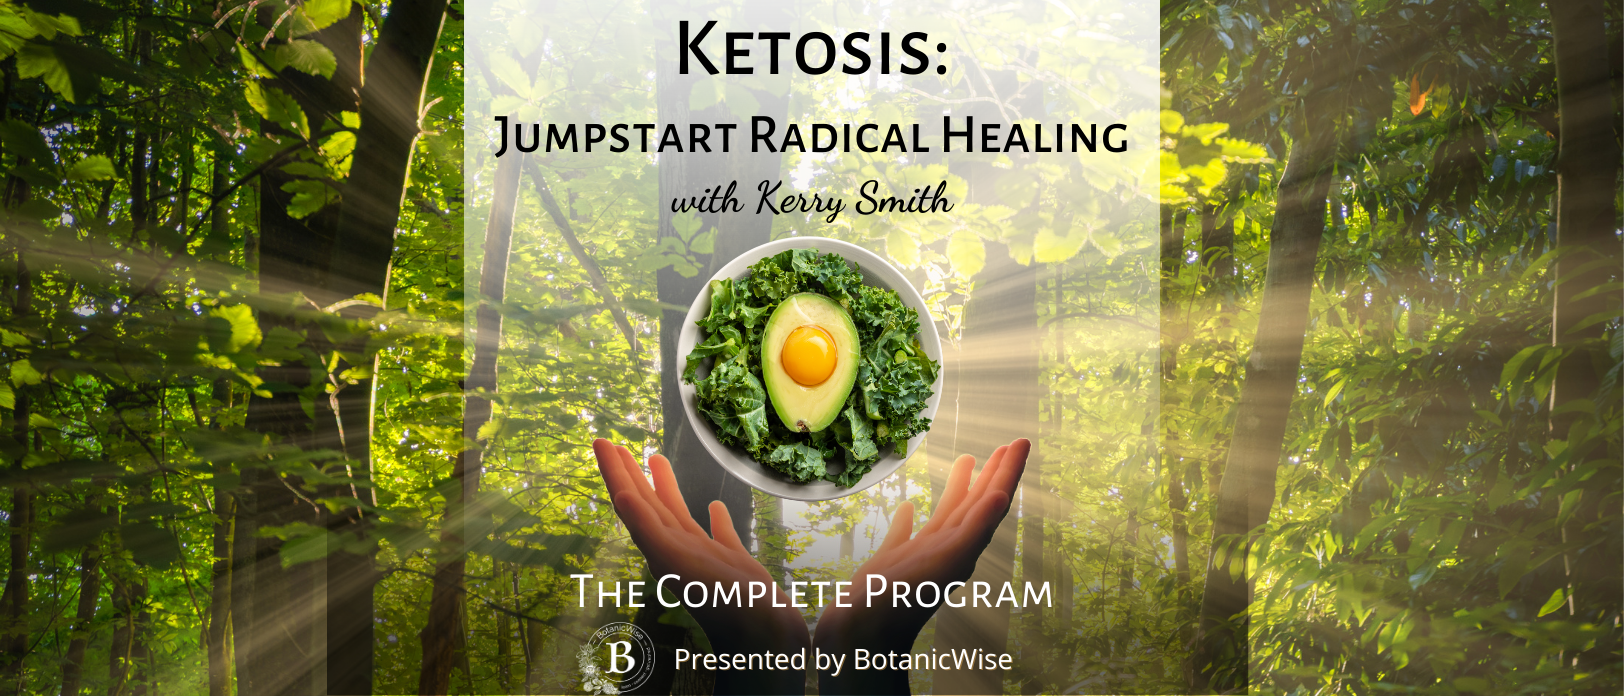 Ketosis: Jumpstart Radical Healing - The Complete Program with Kerry Smith